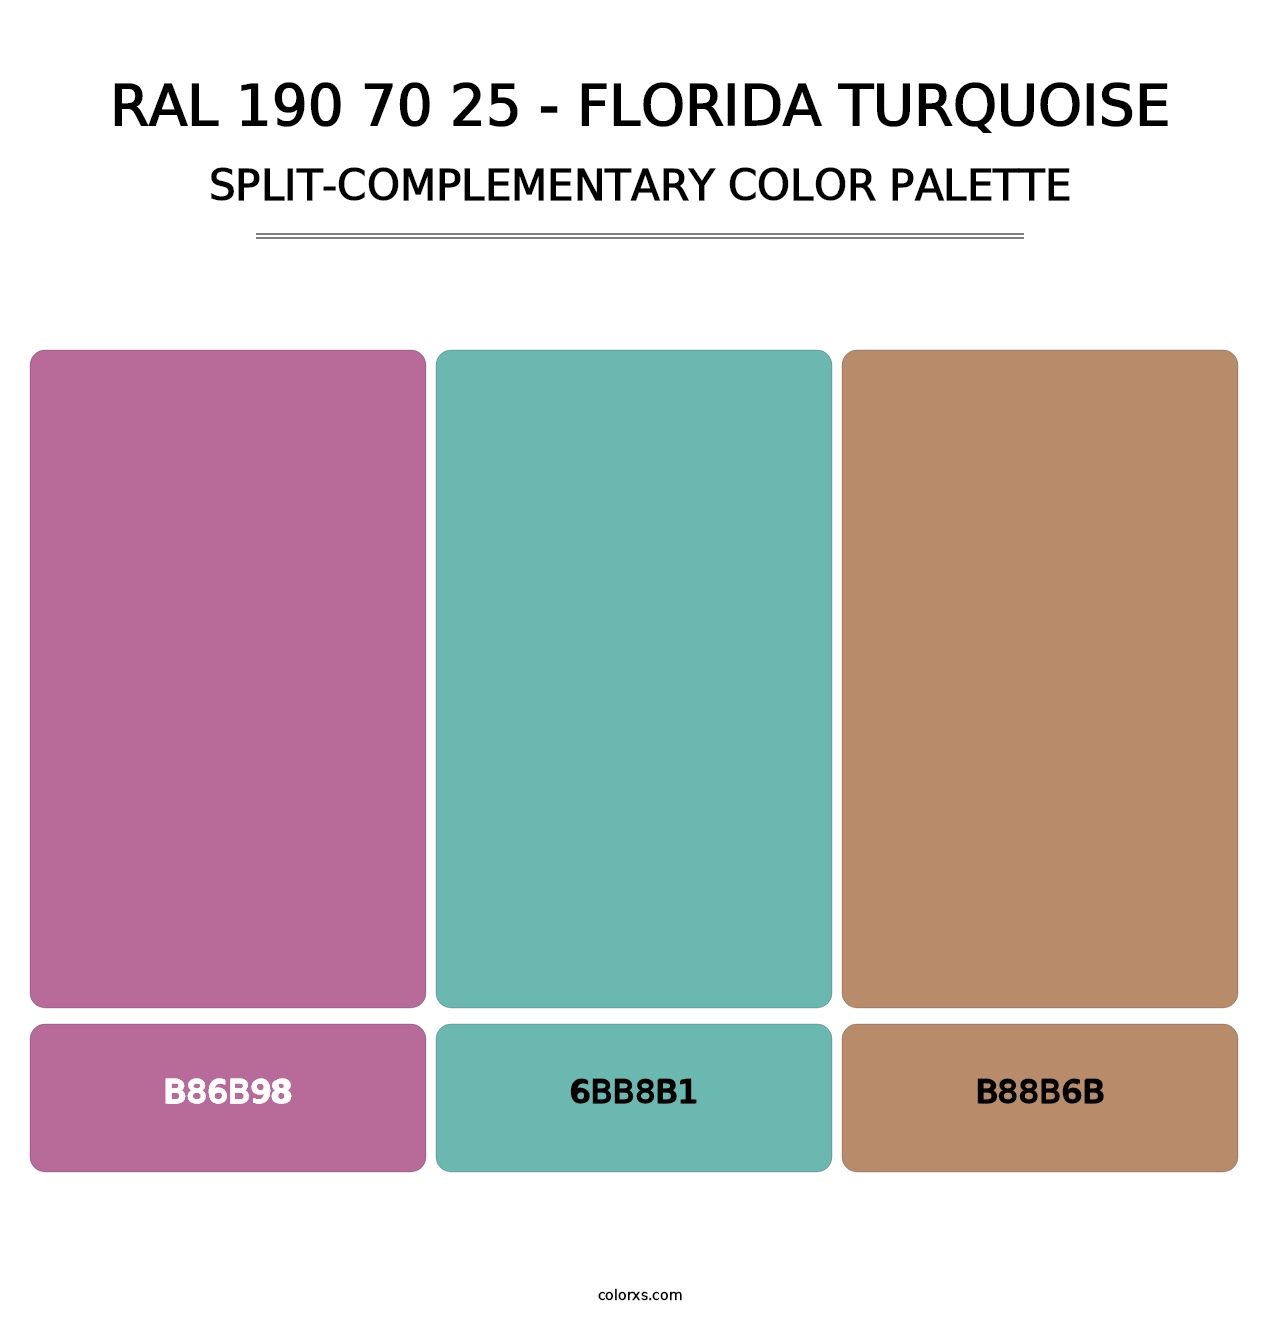 RAL 190 70 25 - Florida Turquoise - Split-Complementary Color Palette